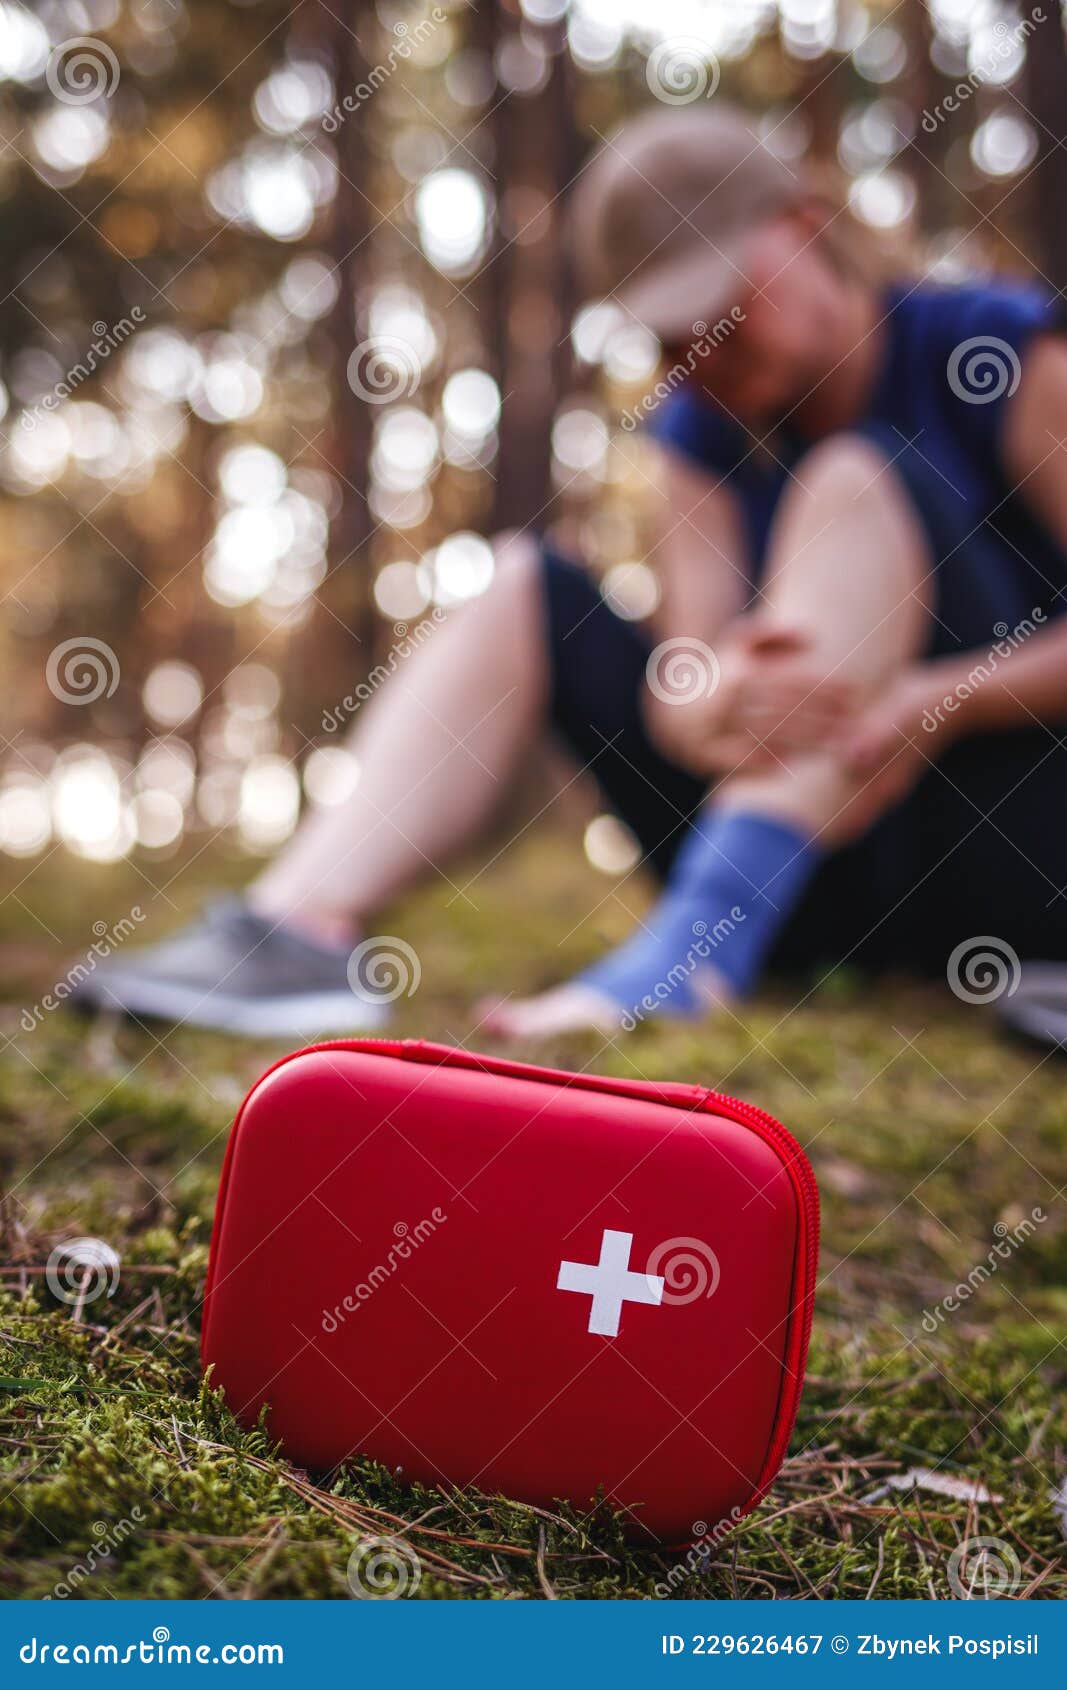 accident and injury during hiking in nature